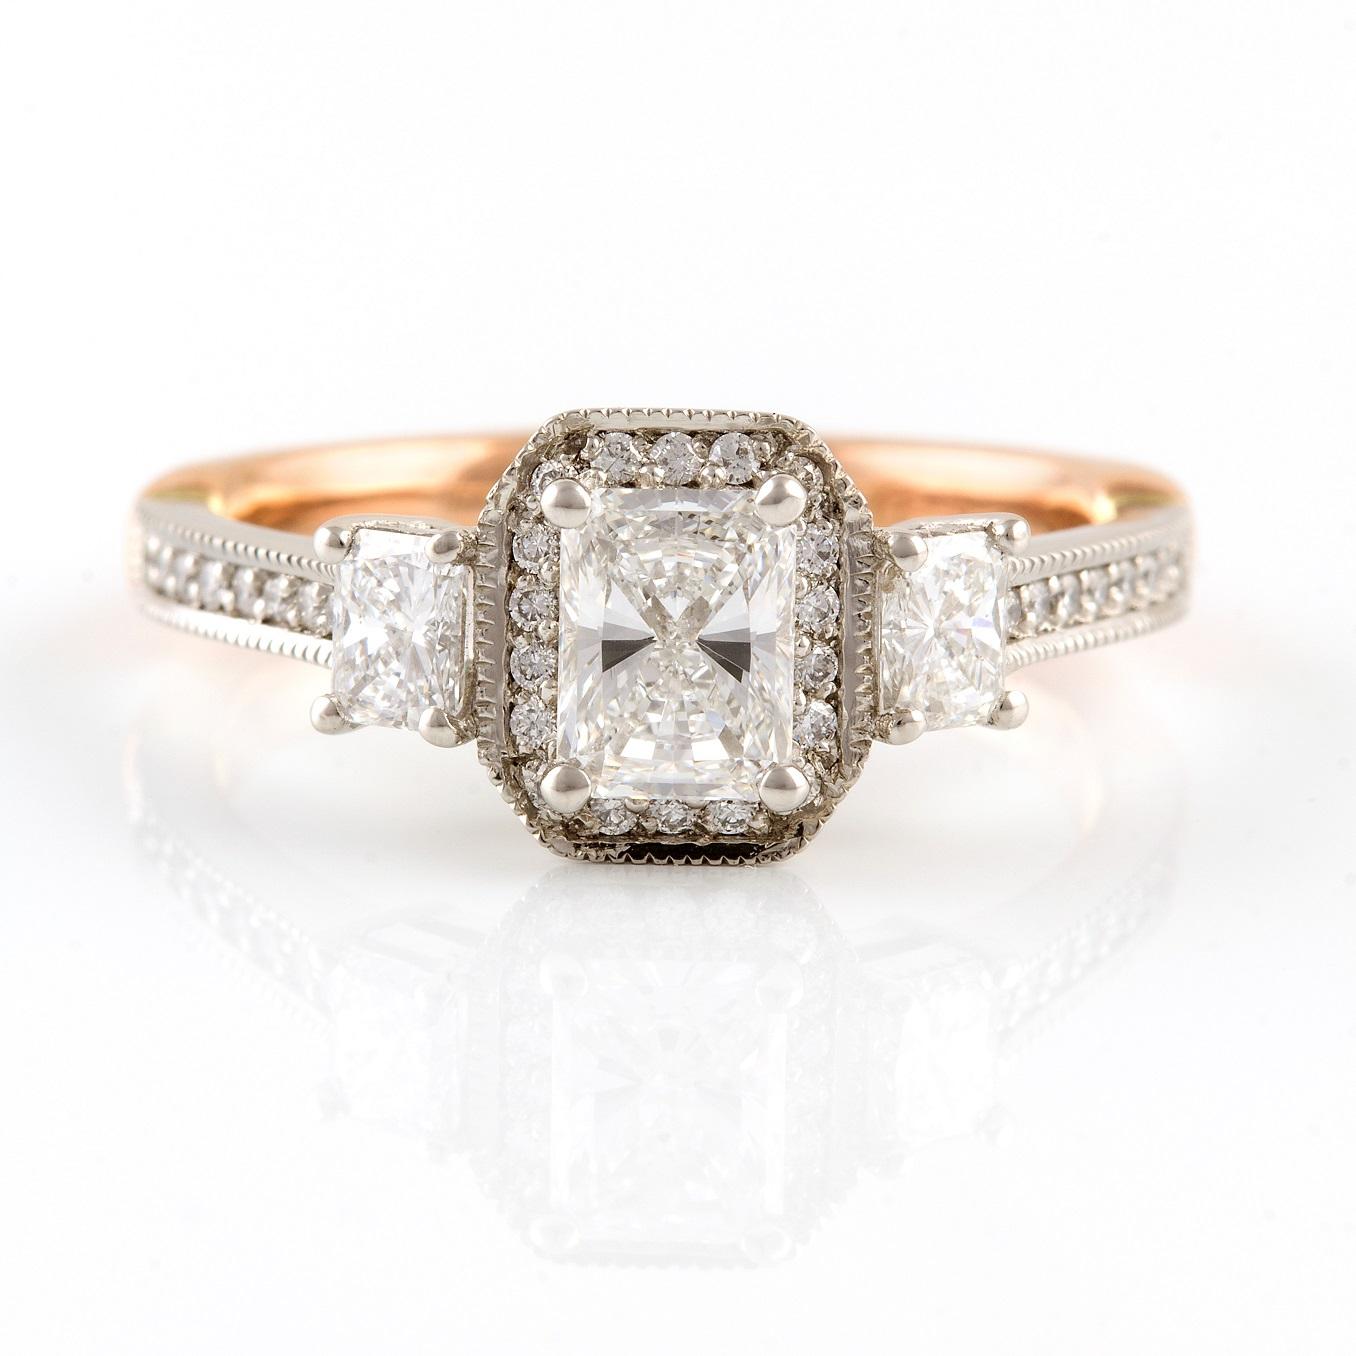 Platino Rosa Diamante Ring

This elegant handmade vintage style ring consists of a beautiful four claw set radiant cut diamond that is surrounded by petite round diamonds. Two smaller radiant cut diamonds are similarly four claw set on either side